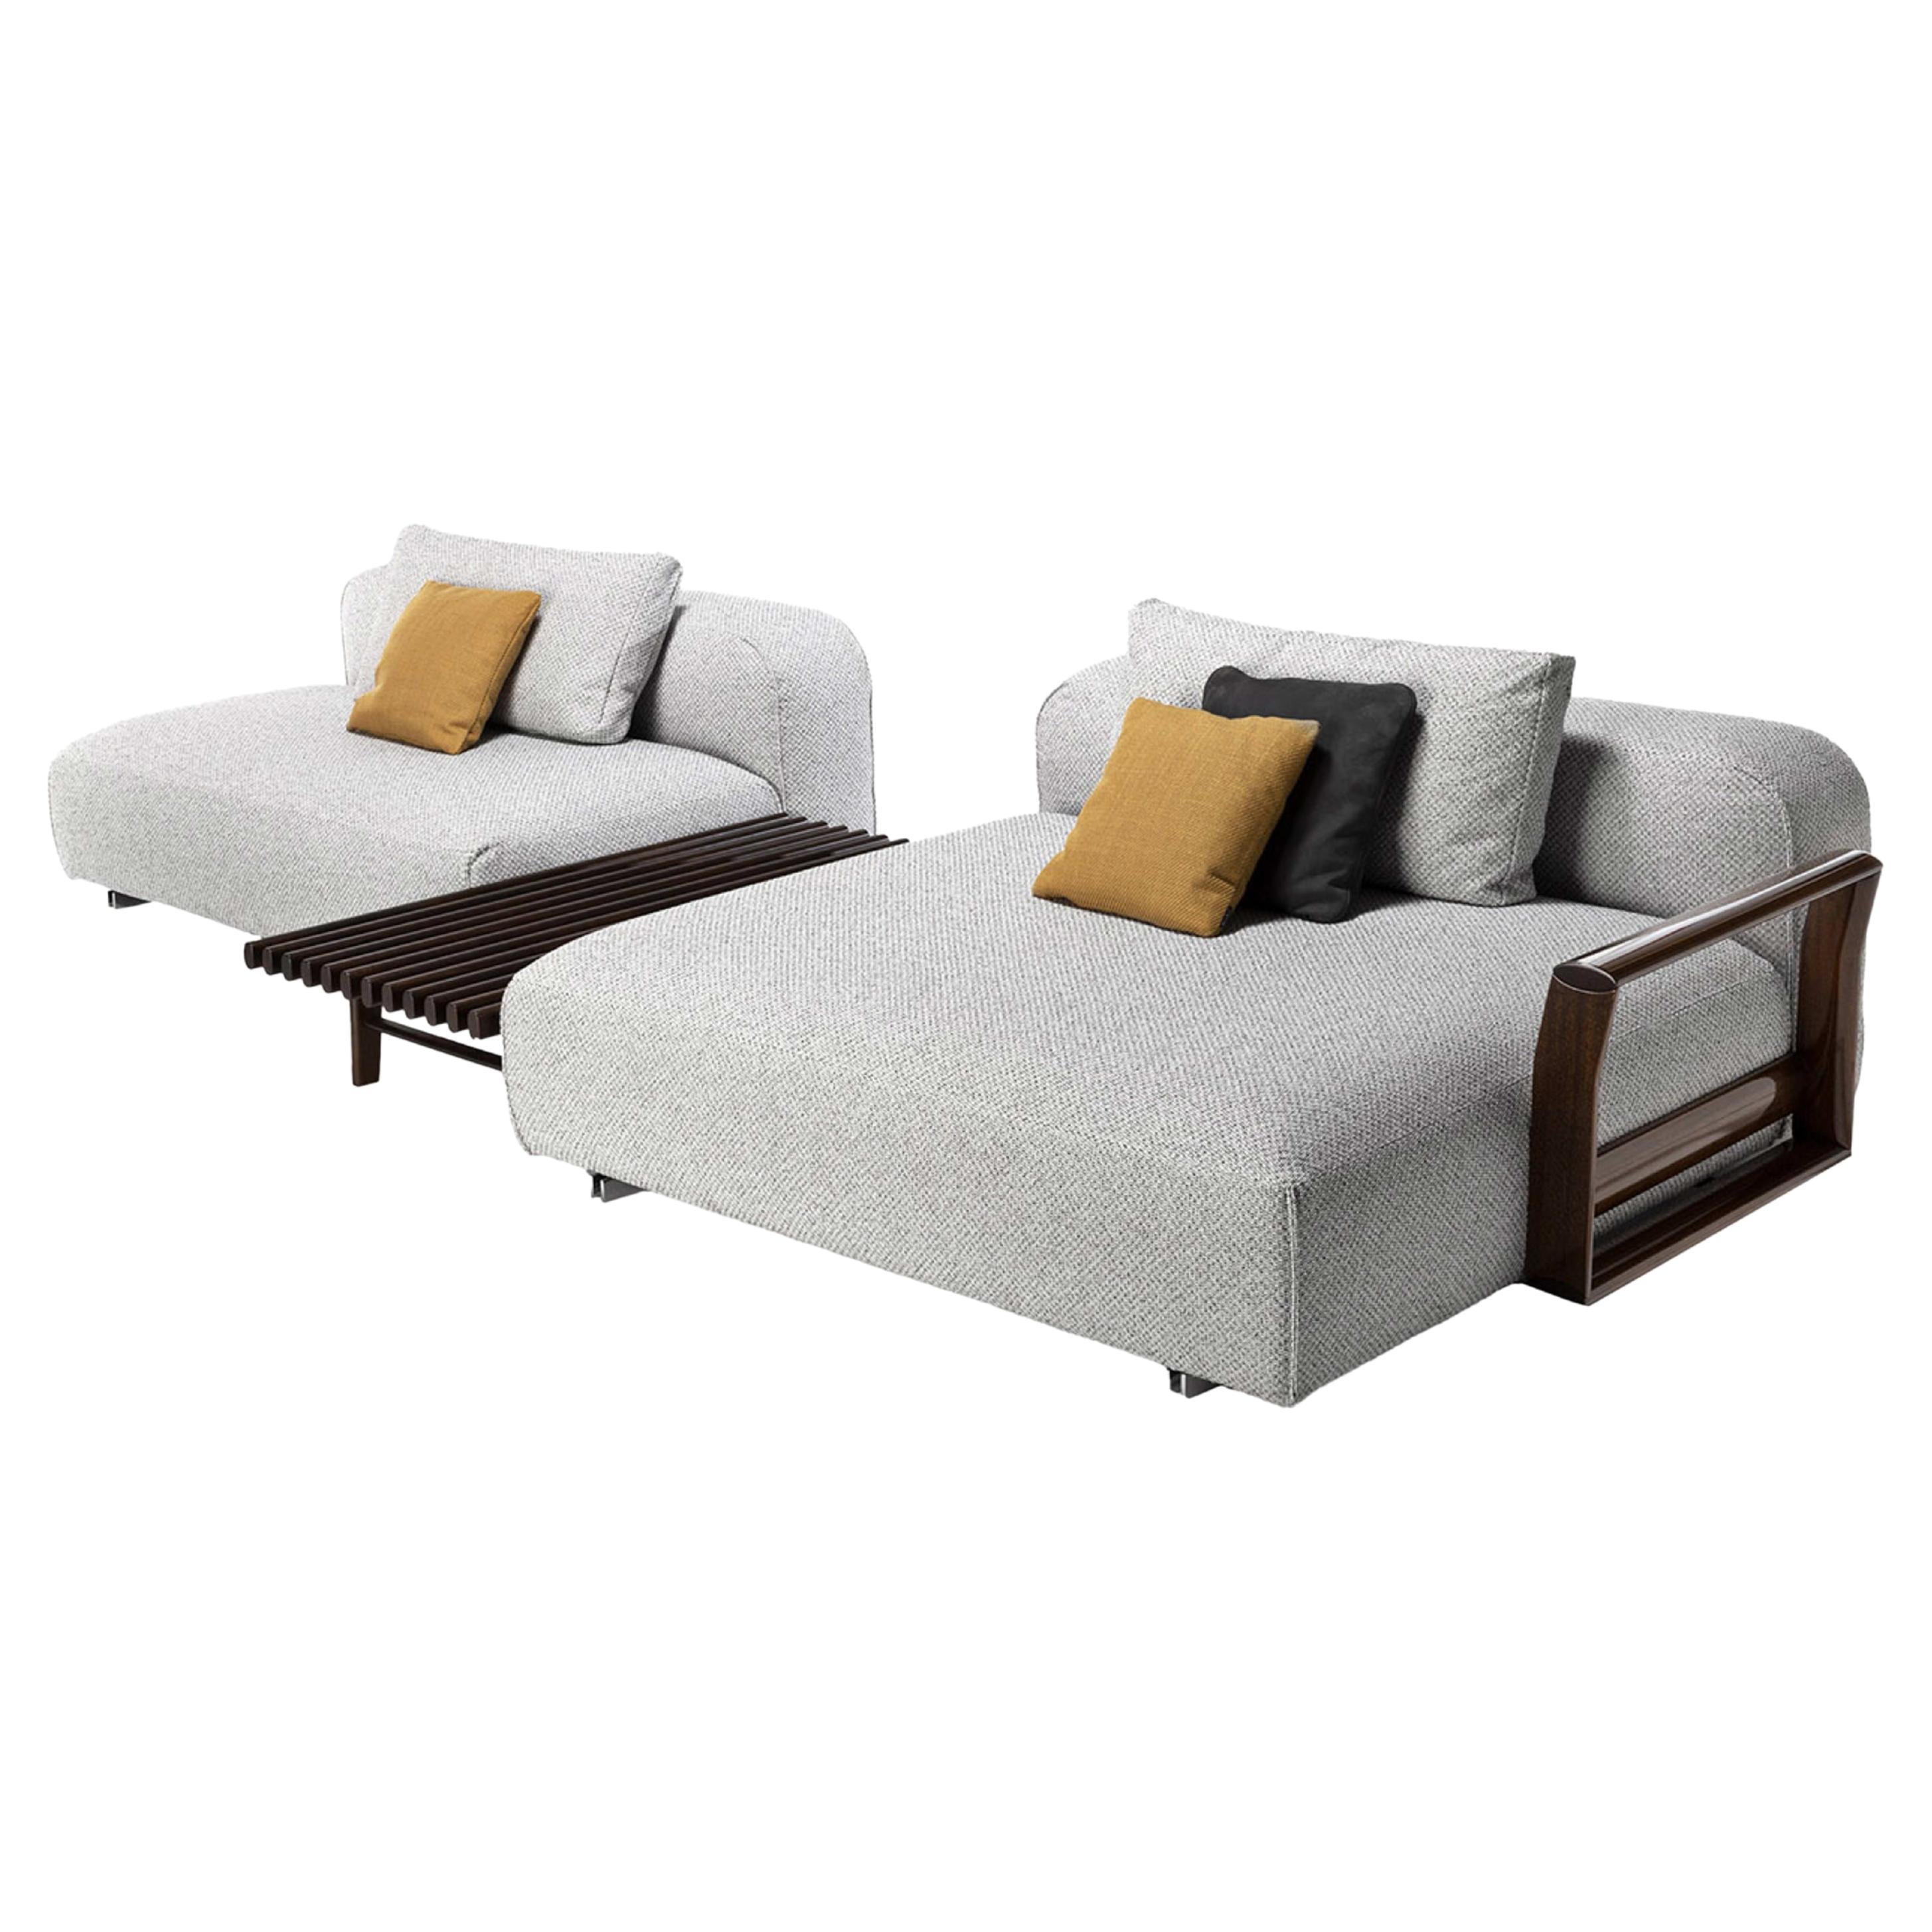 Elba Modular Barrique + Gray Seating System by Massimo Castagna For Sale